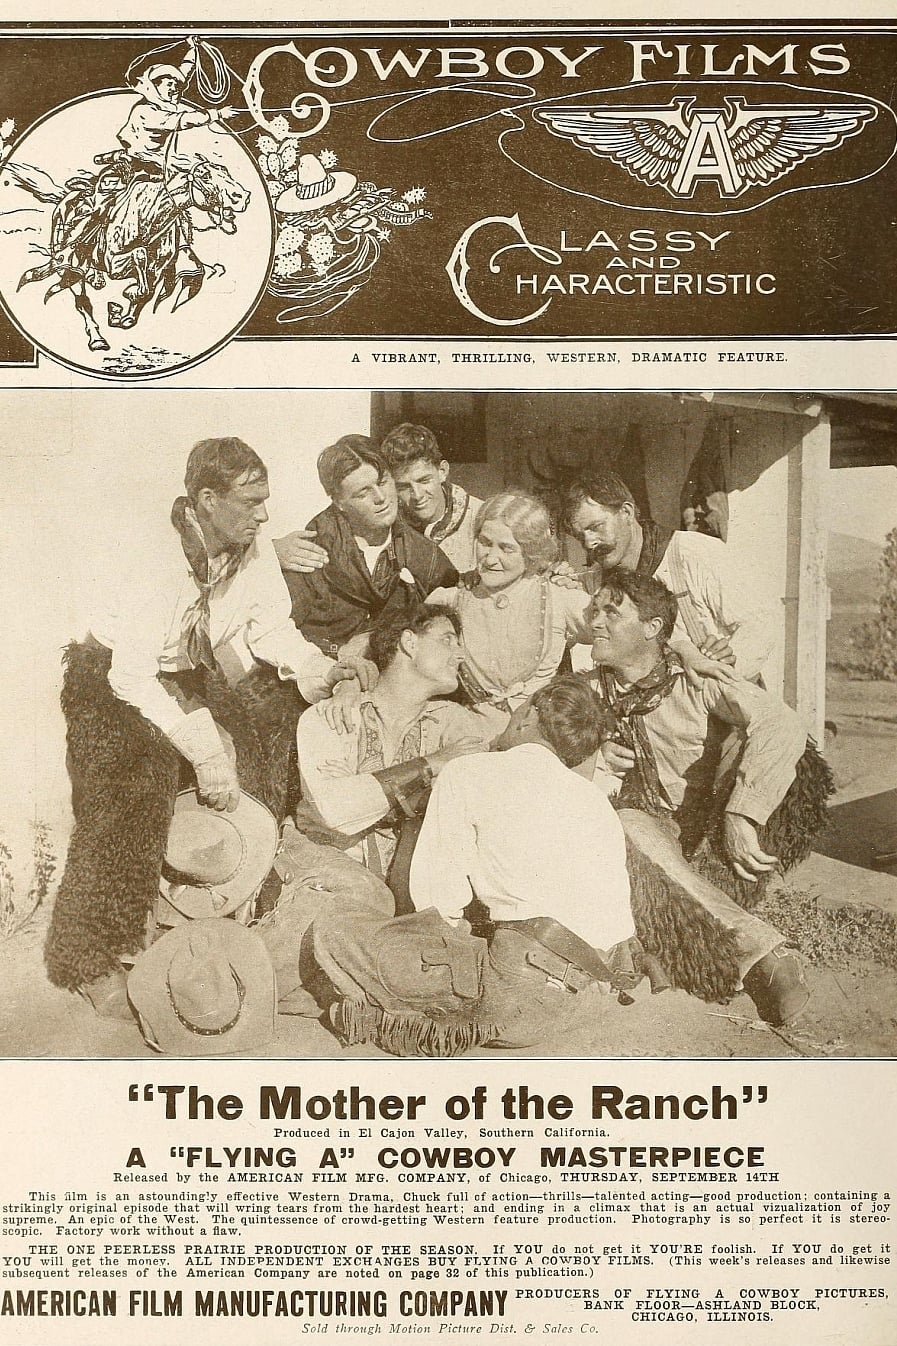 The Mother of the Ranch